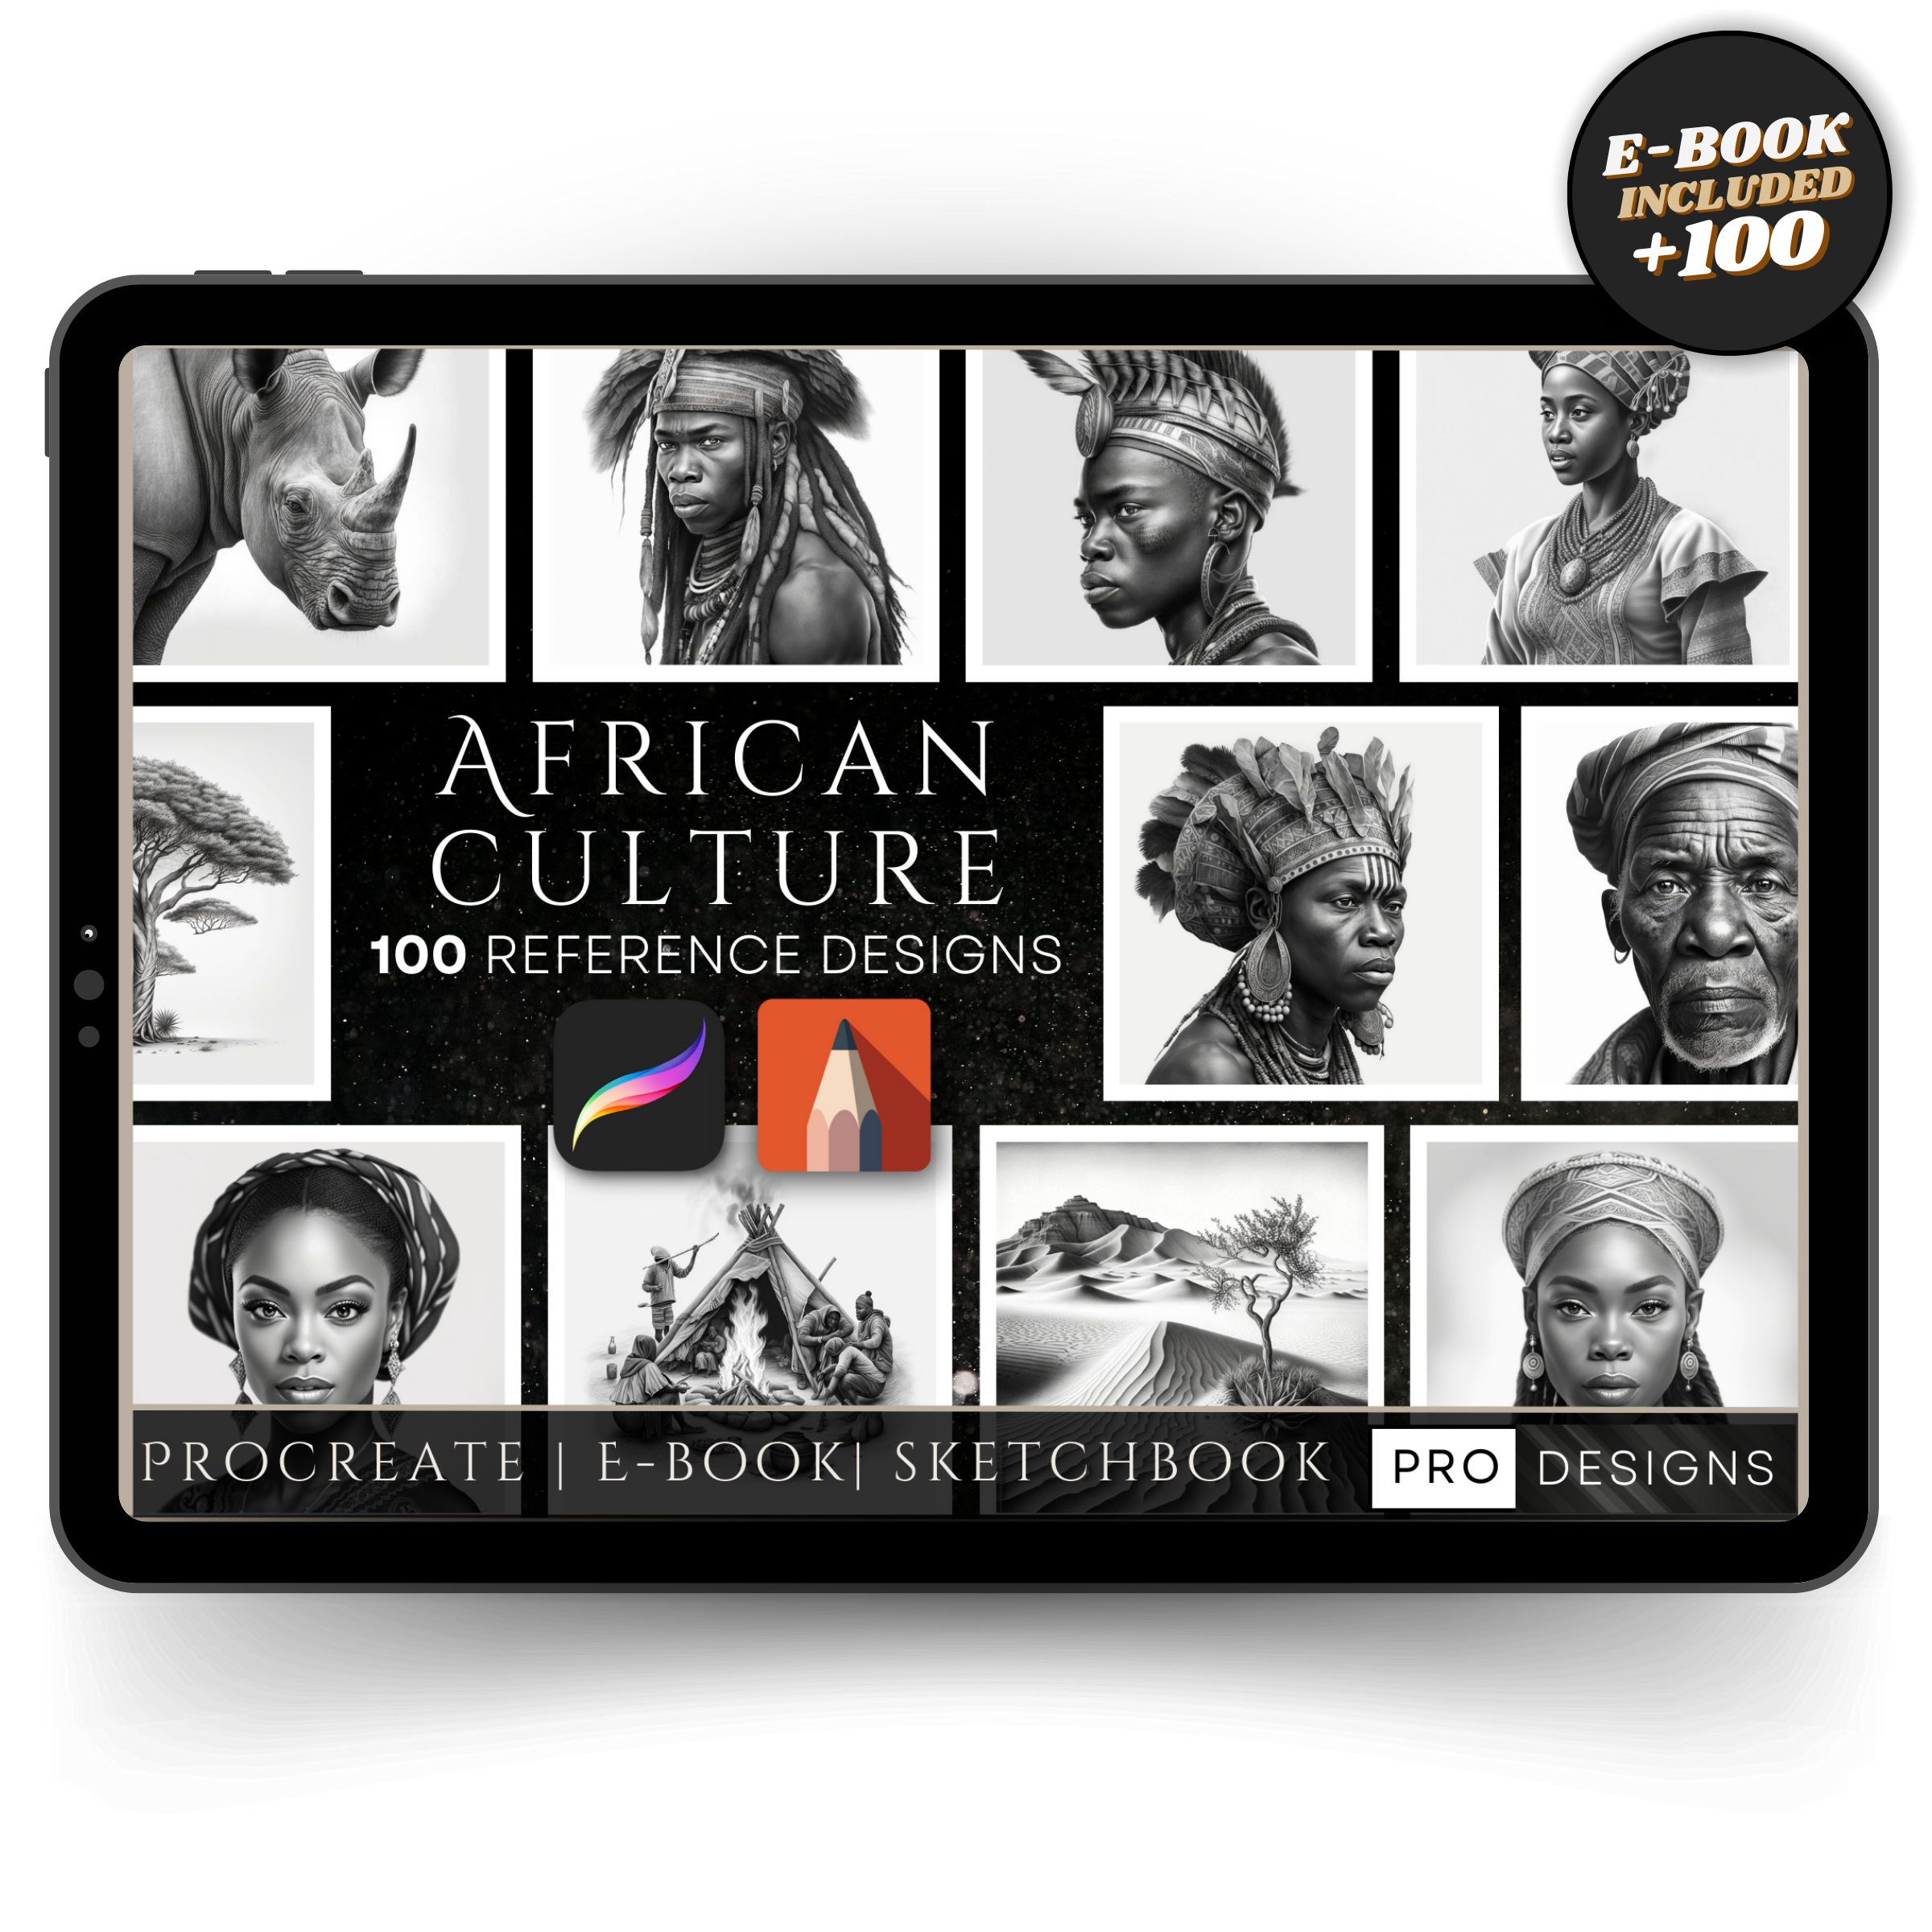 "African Culture" - A Digital Odyssey of Artistic Heritage